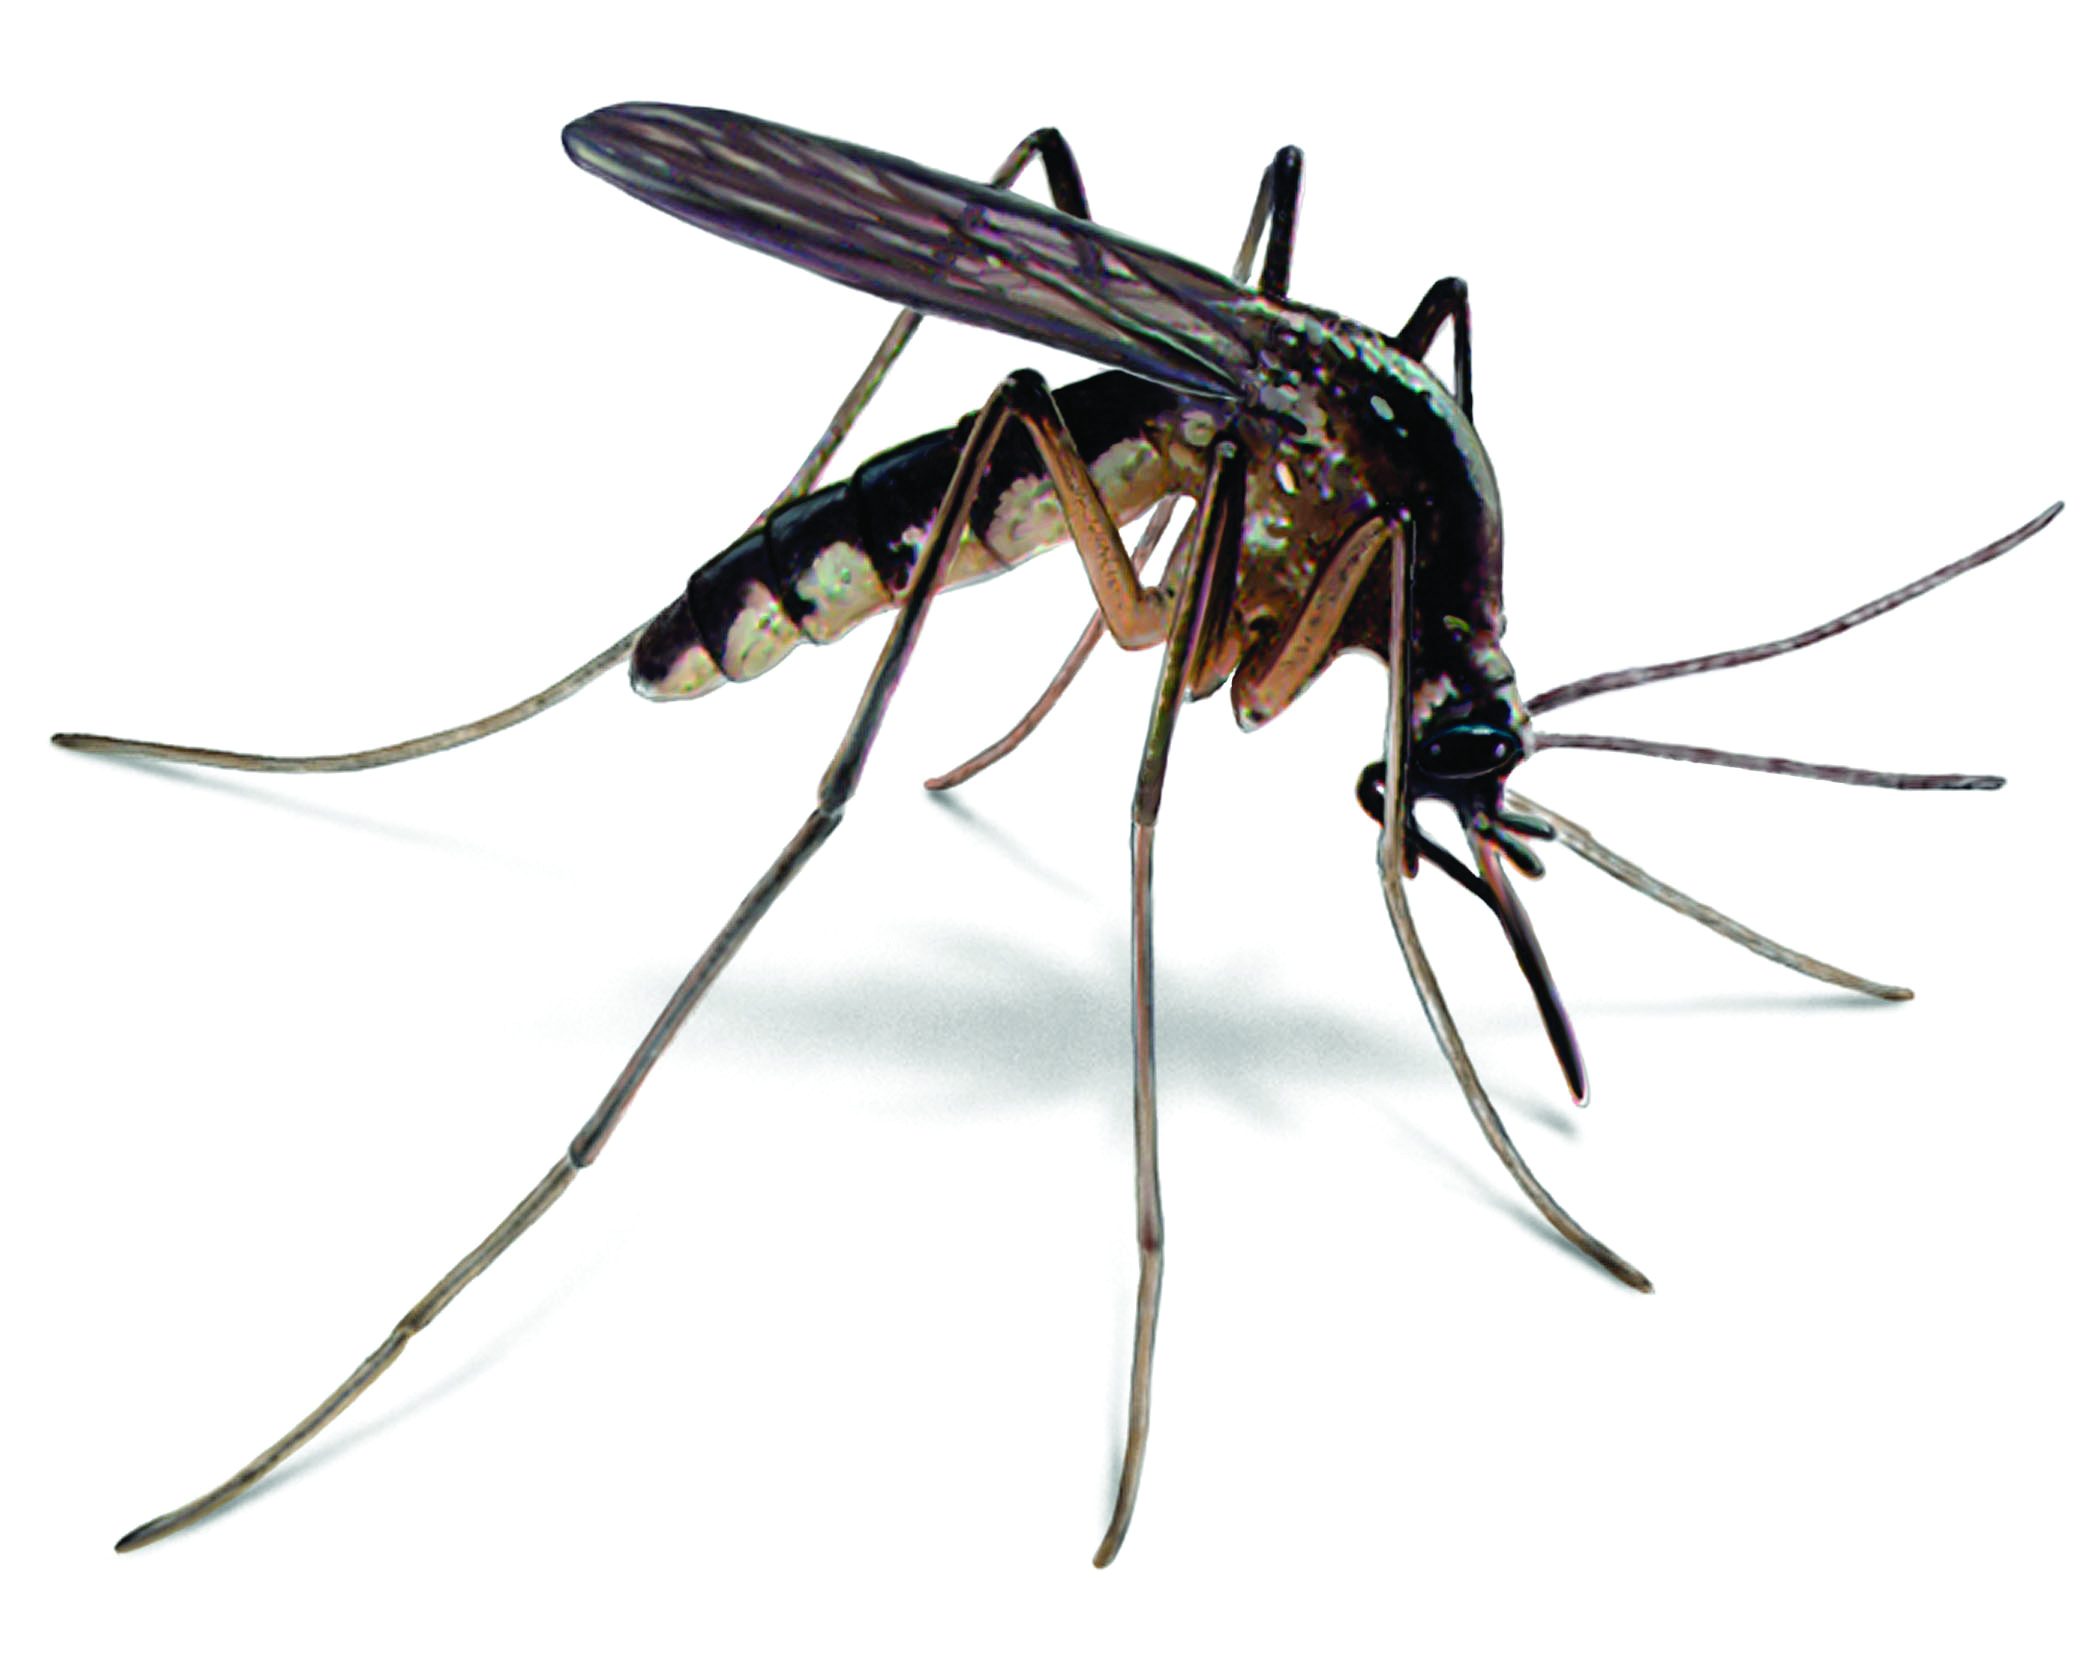 Mosquito Control: How to Get Rid of Mosquitoes